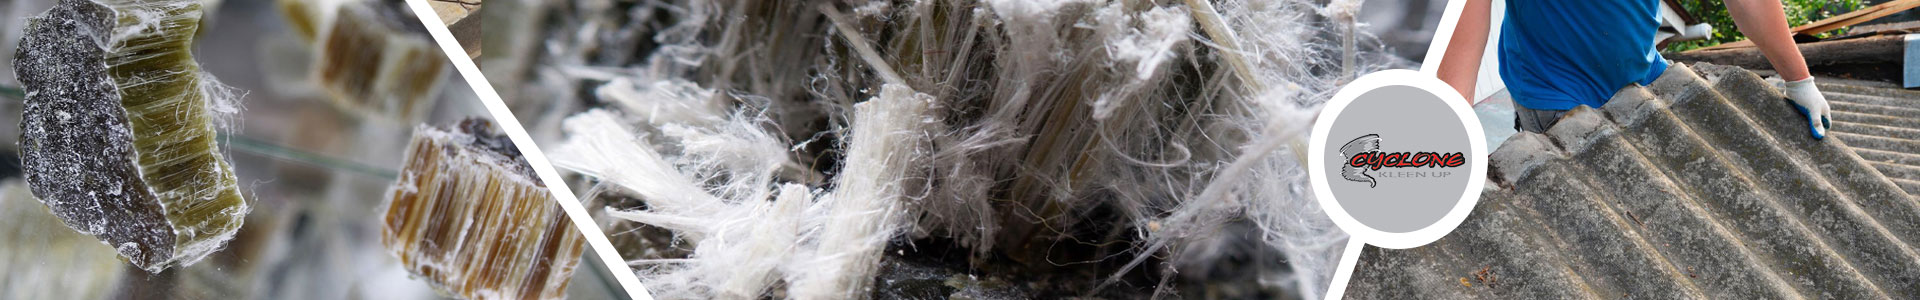 Commonly Found Asbestos-Containing Materials in Houses of Colorado